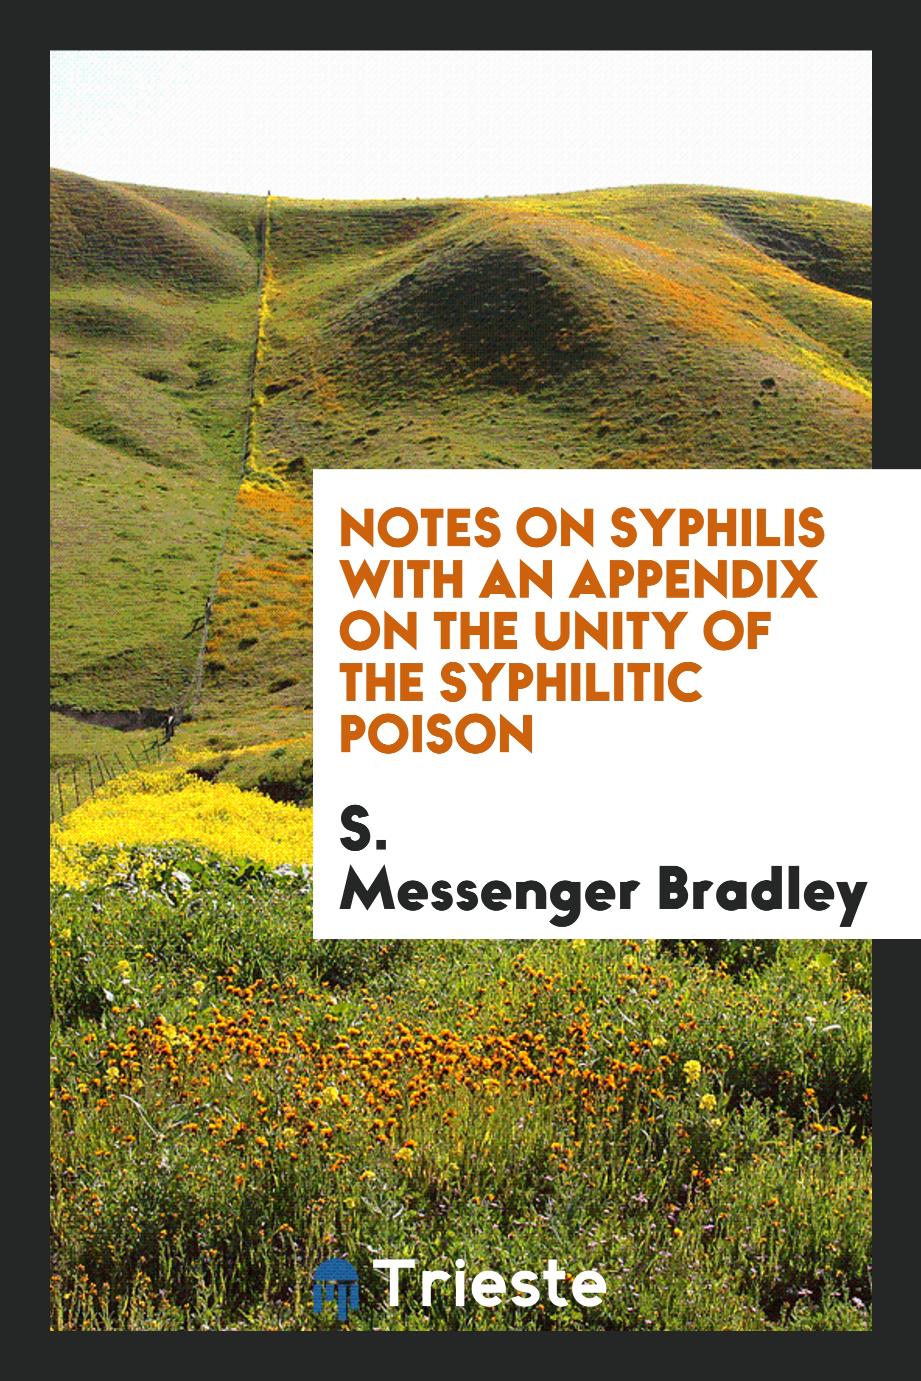 Notes on Syphilis with an Appendix on the Unity of the Syphilitic Poison